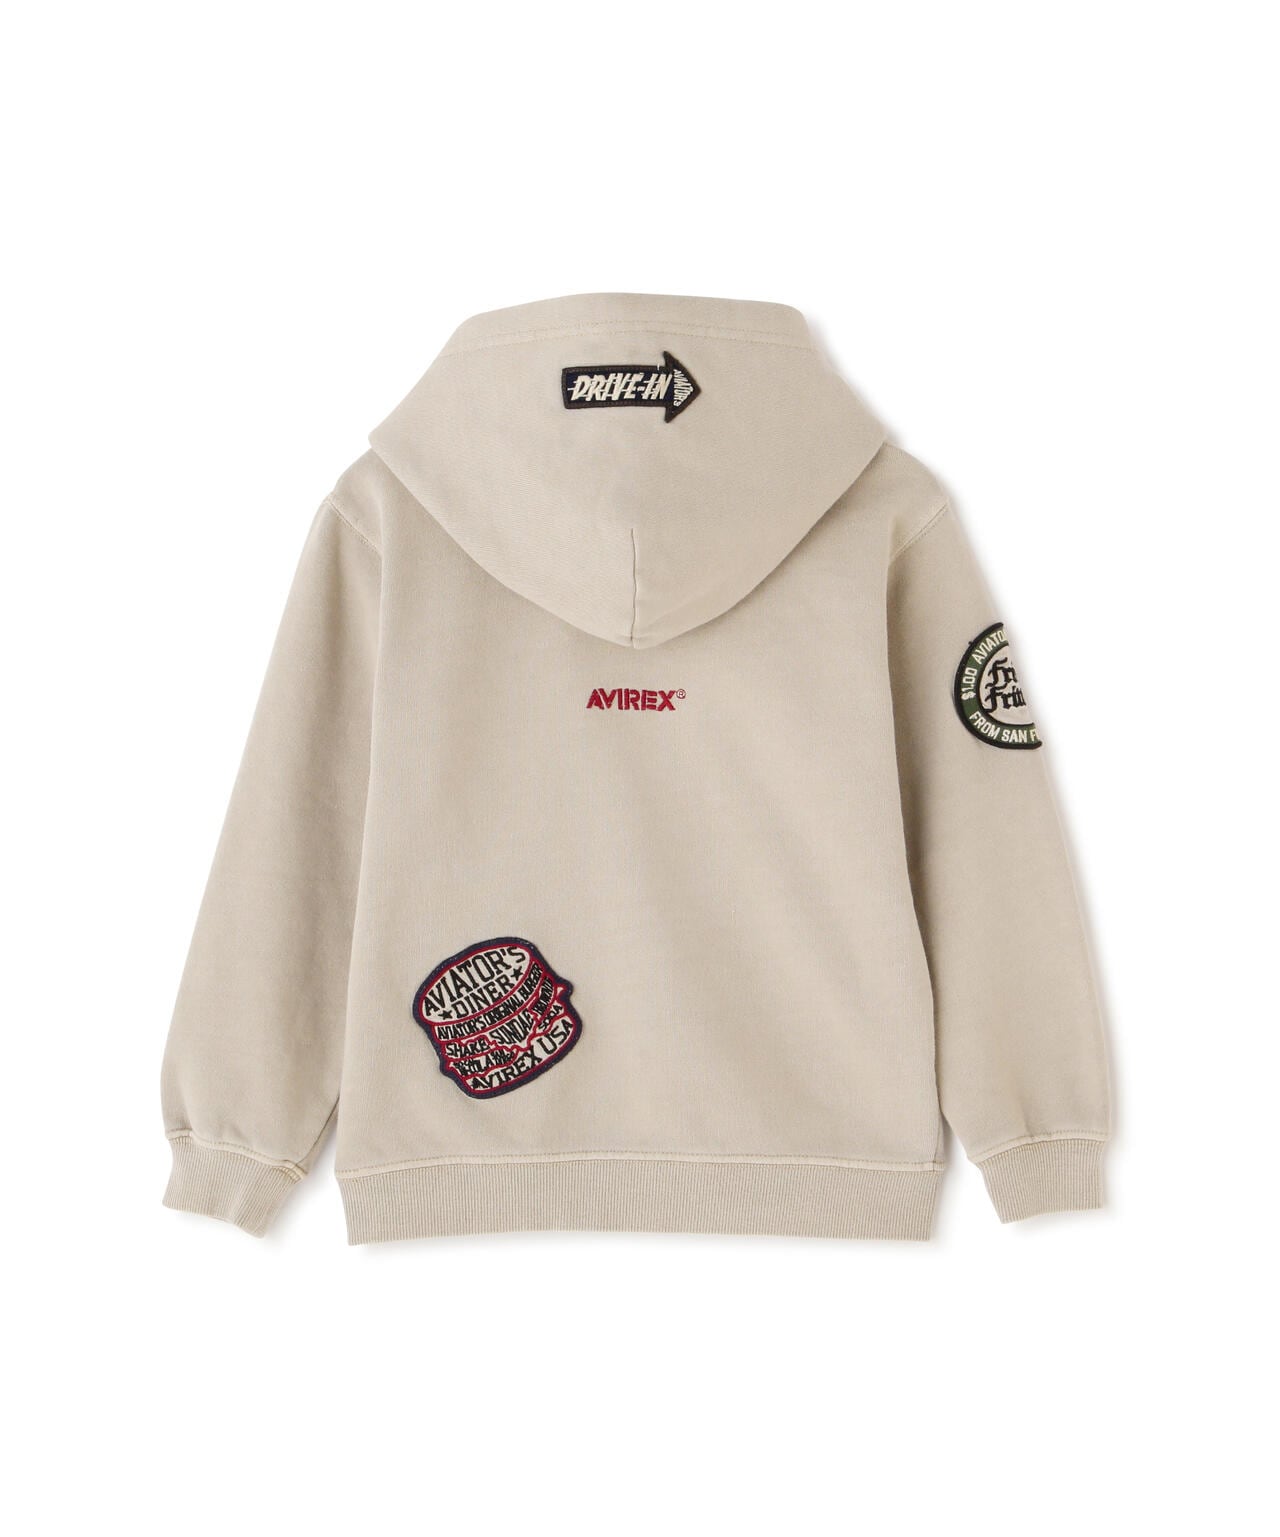 【KID'S/キッズ】LONG SLEEVE WEST COAST PULL OVER PARKA